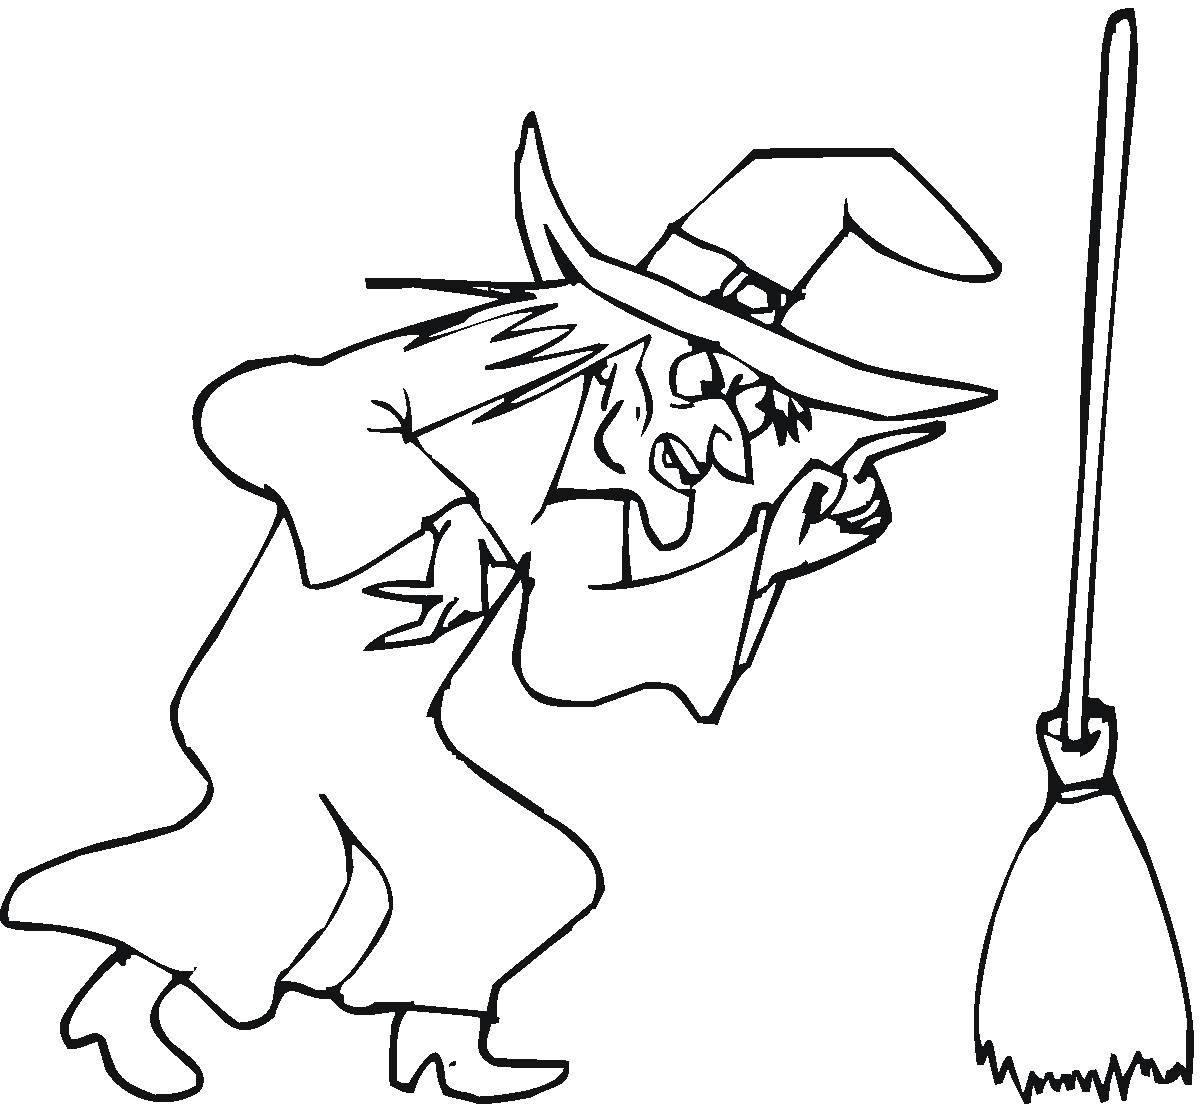 Coloring Witch broom. Category witch. Tags:  Halloween, witch, potion.